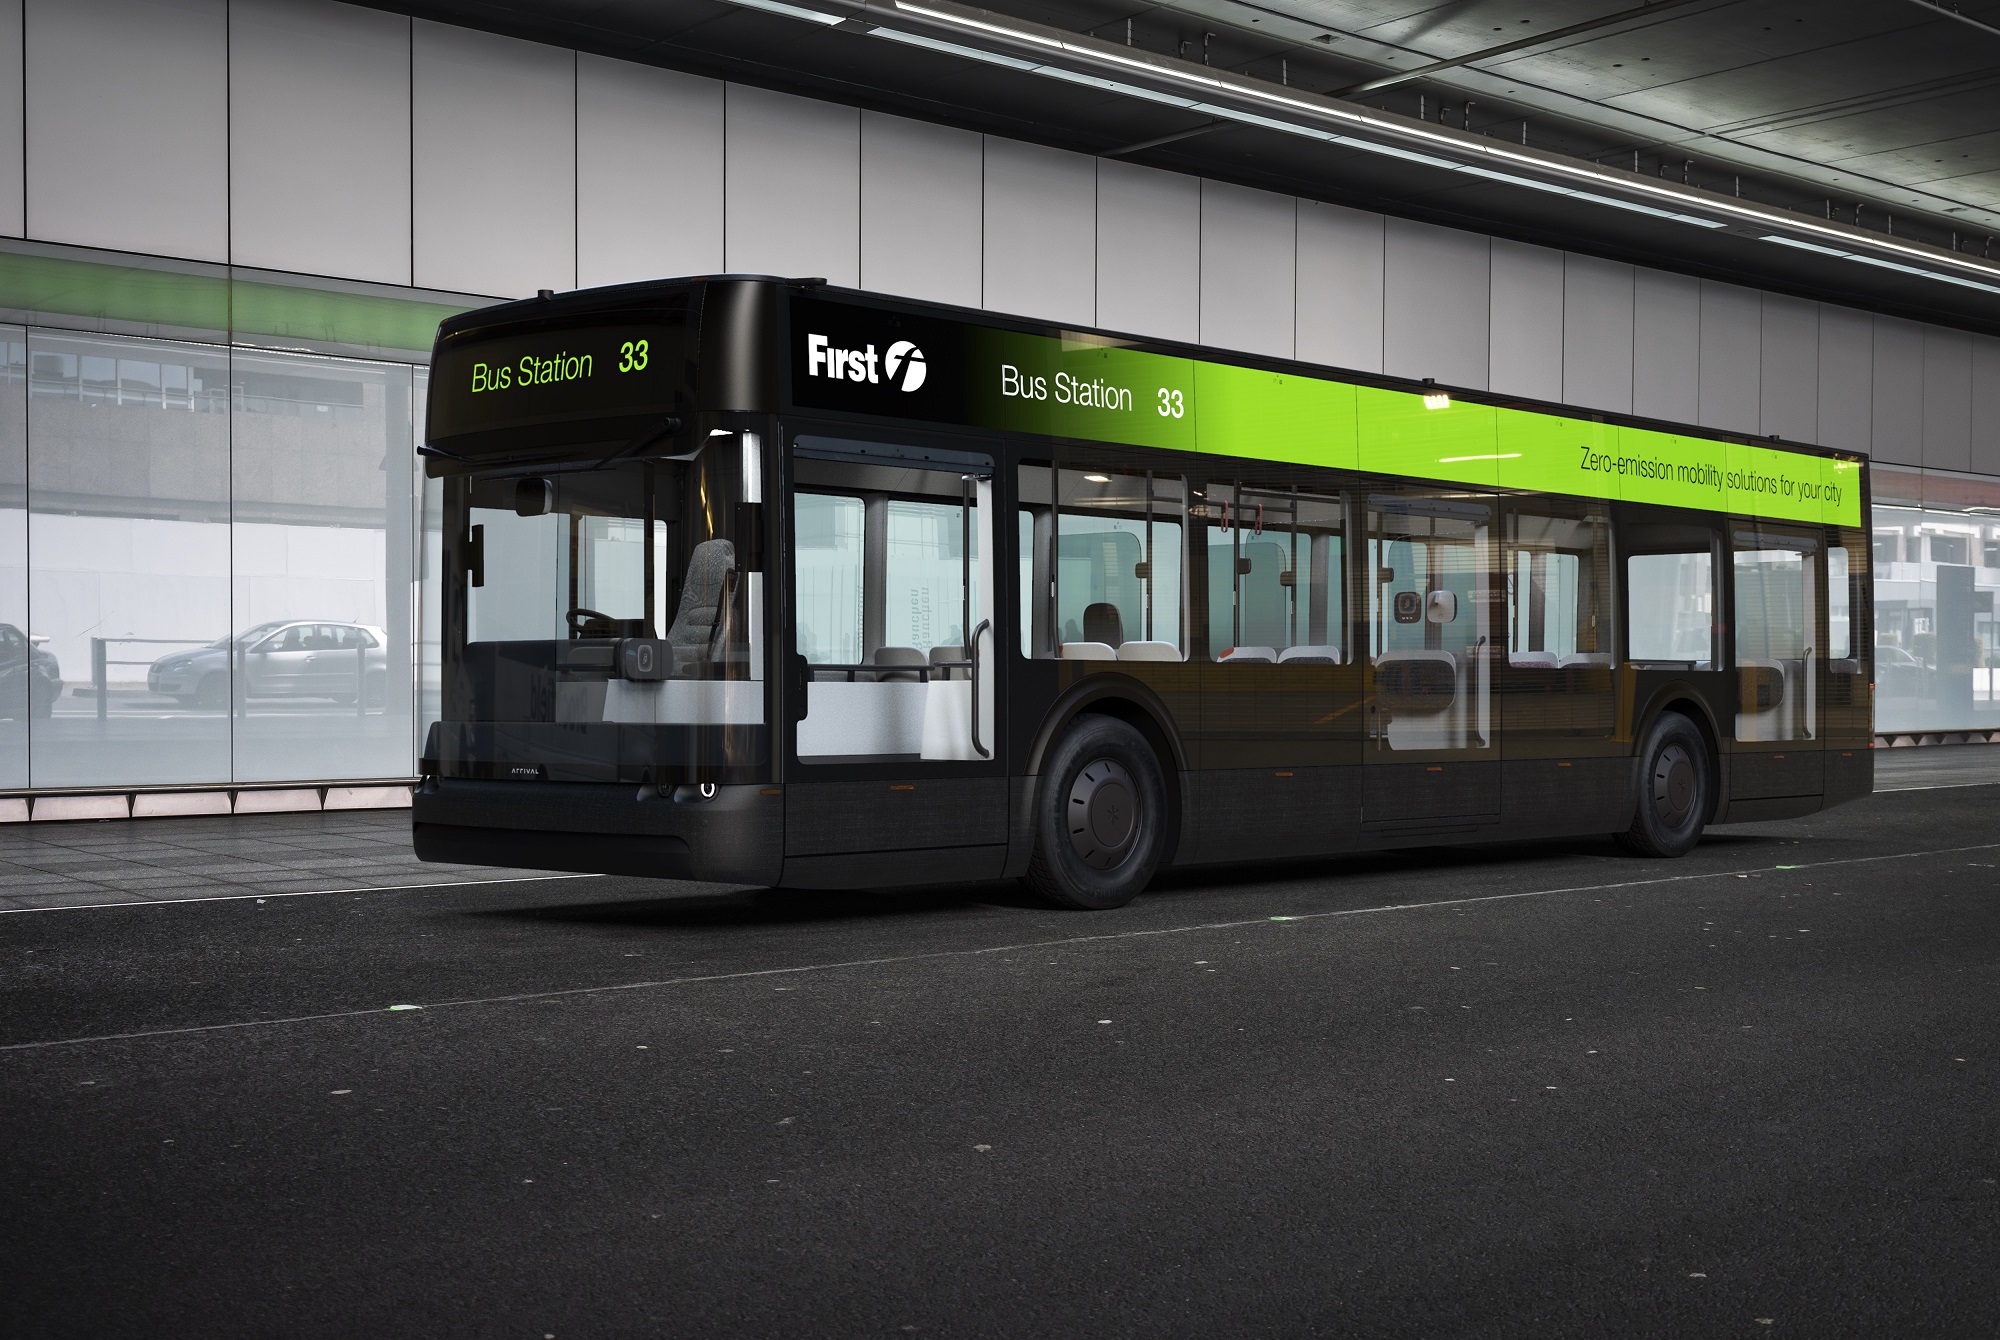 First Bus to trial Arrival electric bus